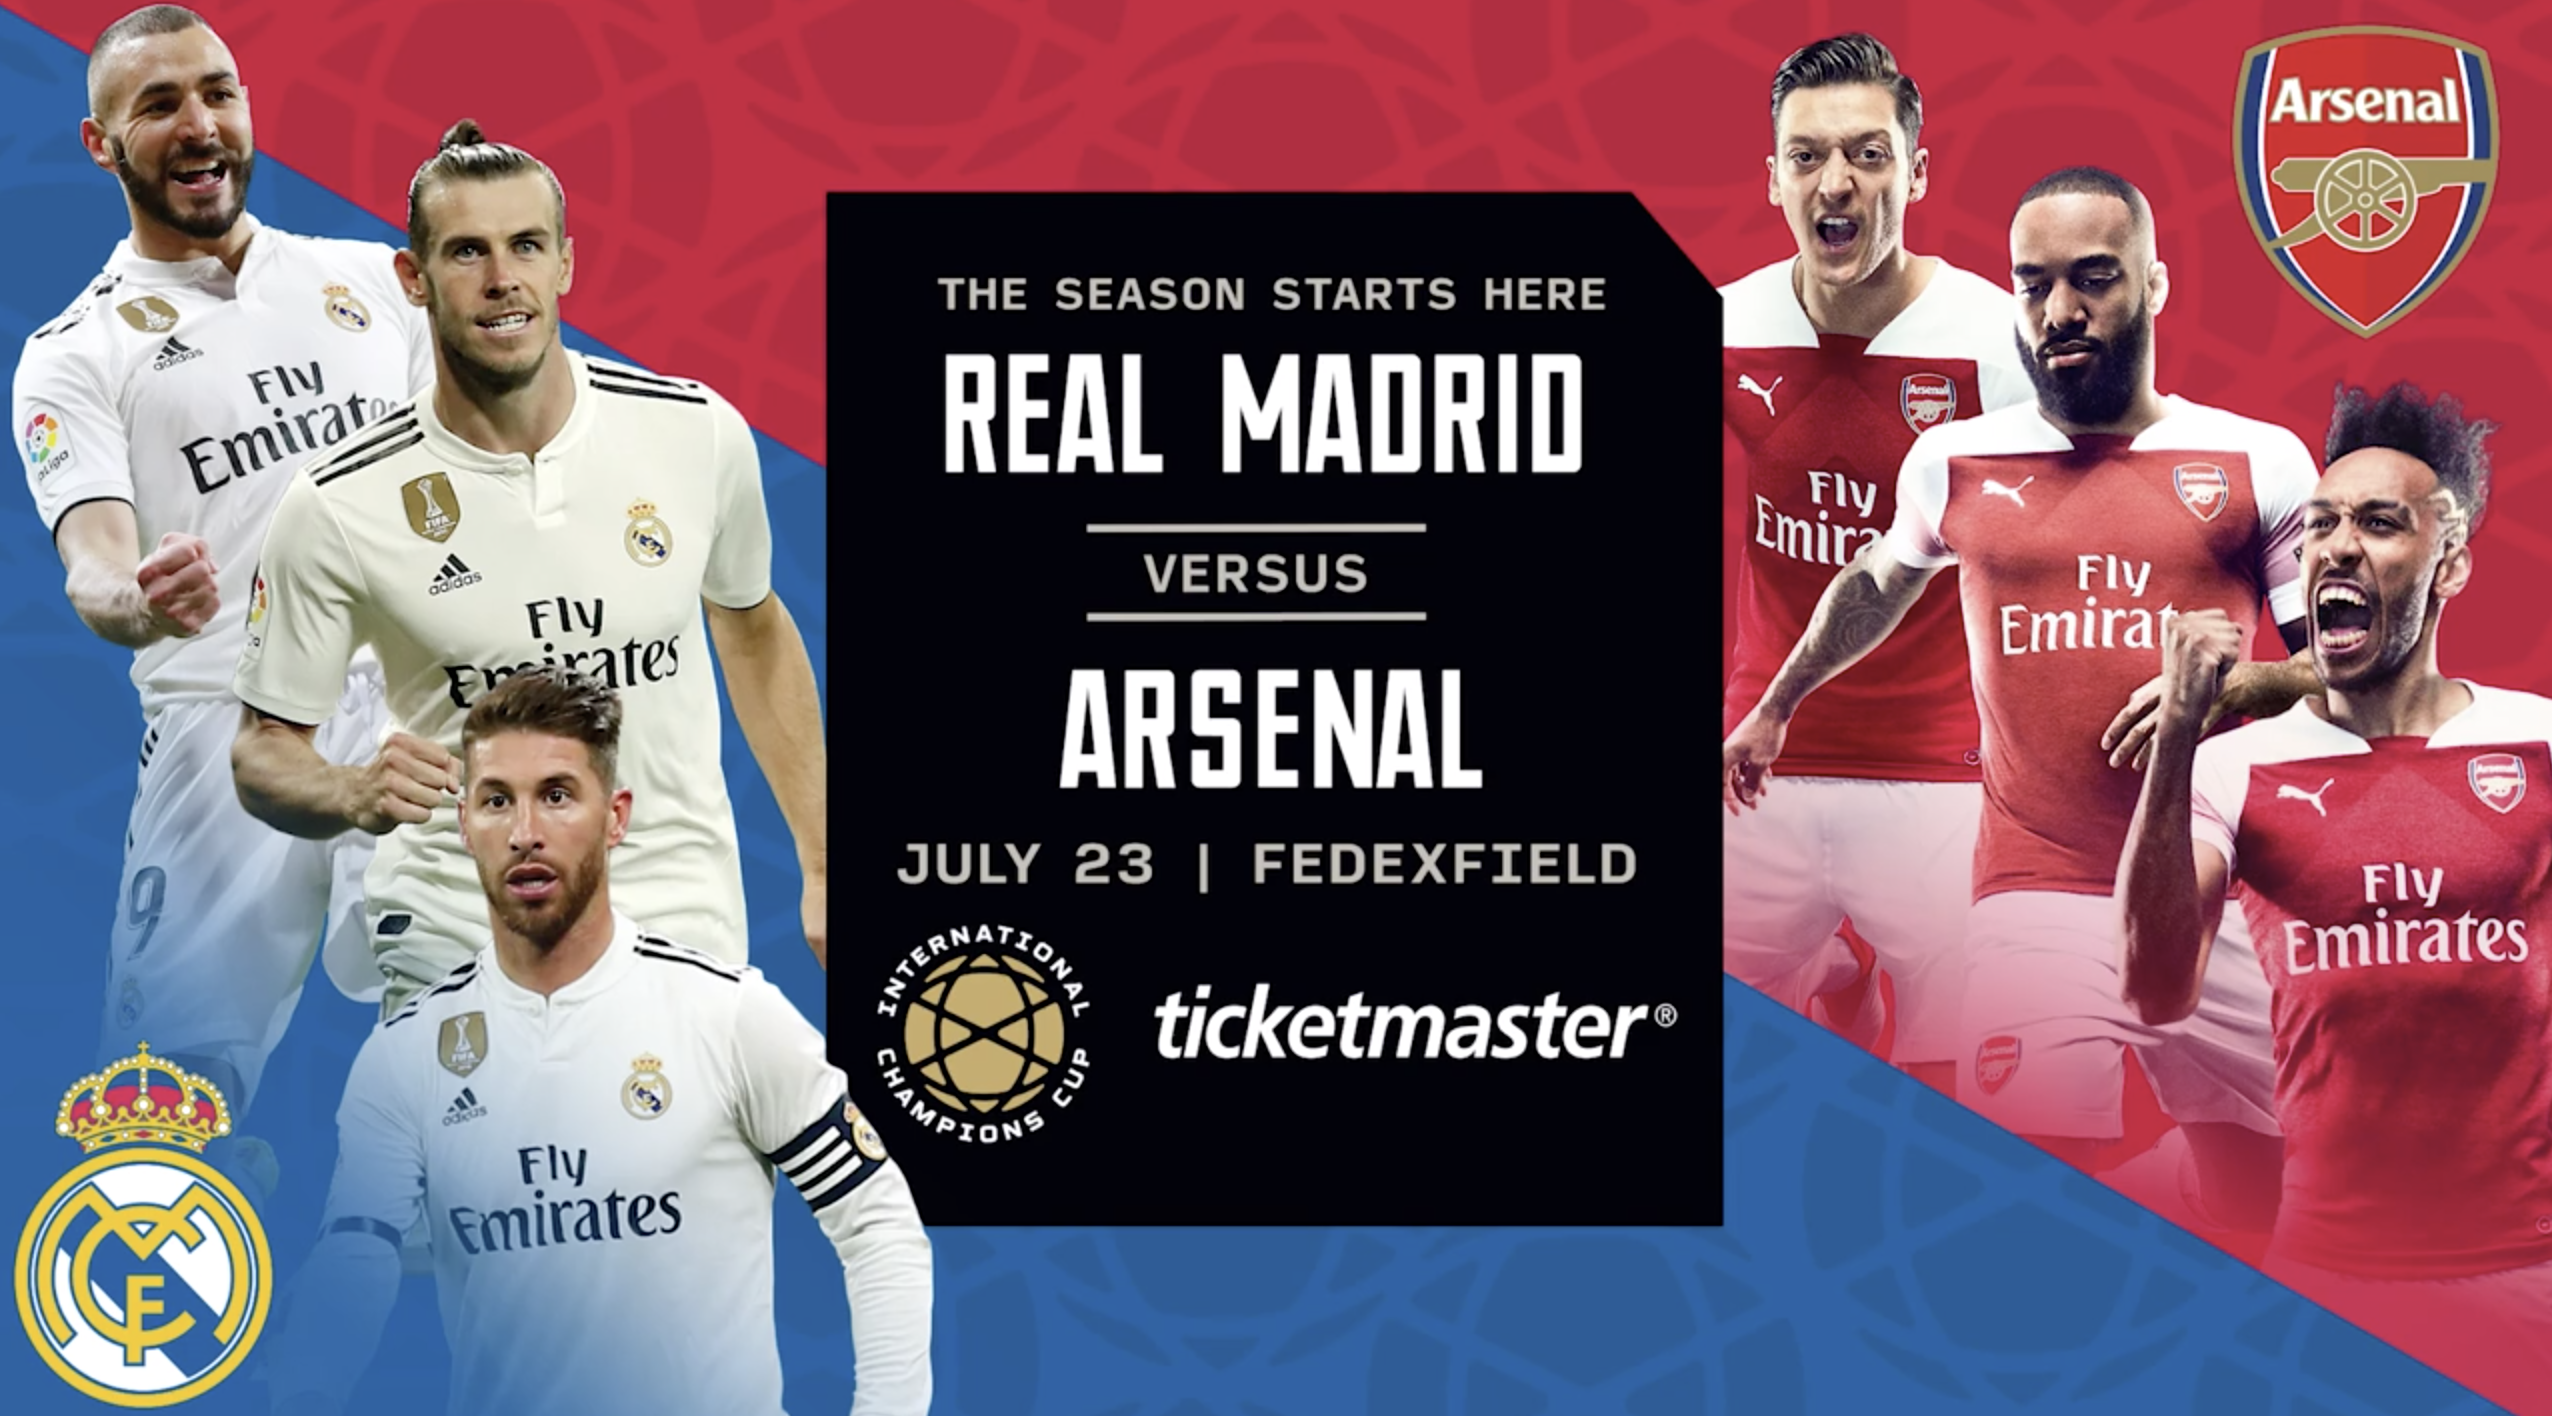 Real Madrid versus Arsenal playing at the FEDEX Field in Washington, DC on July 23, 2019 during the International Champions Cup 2019